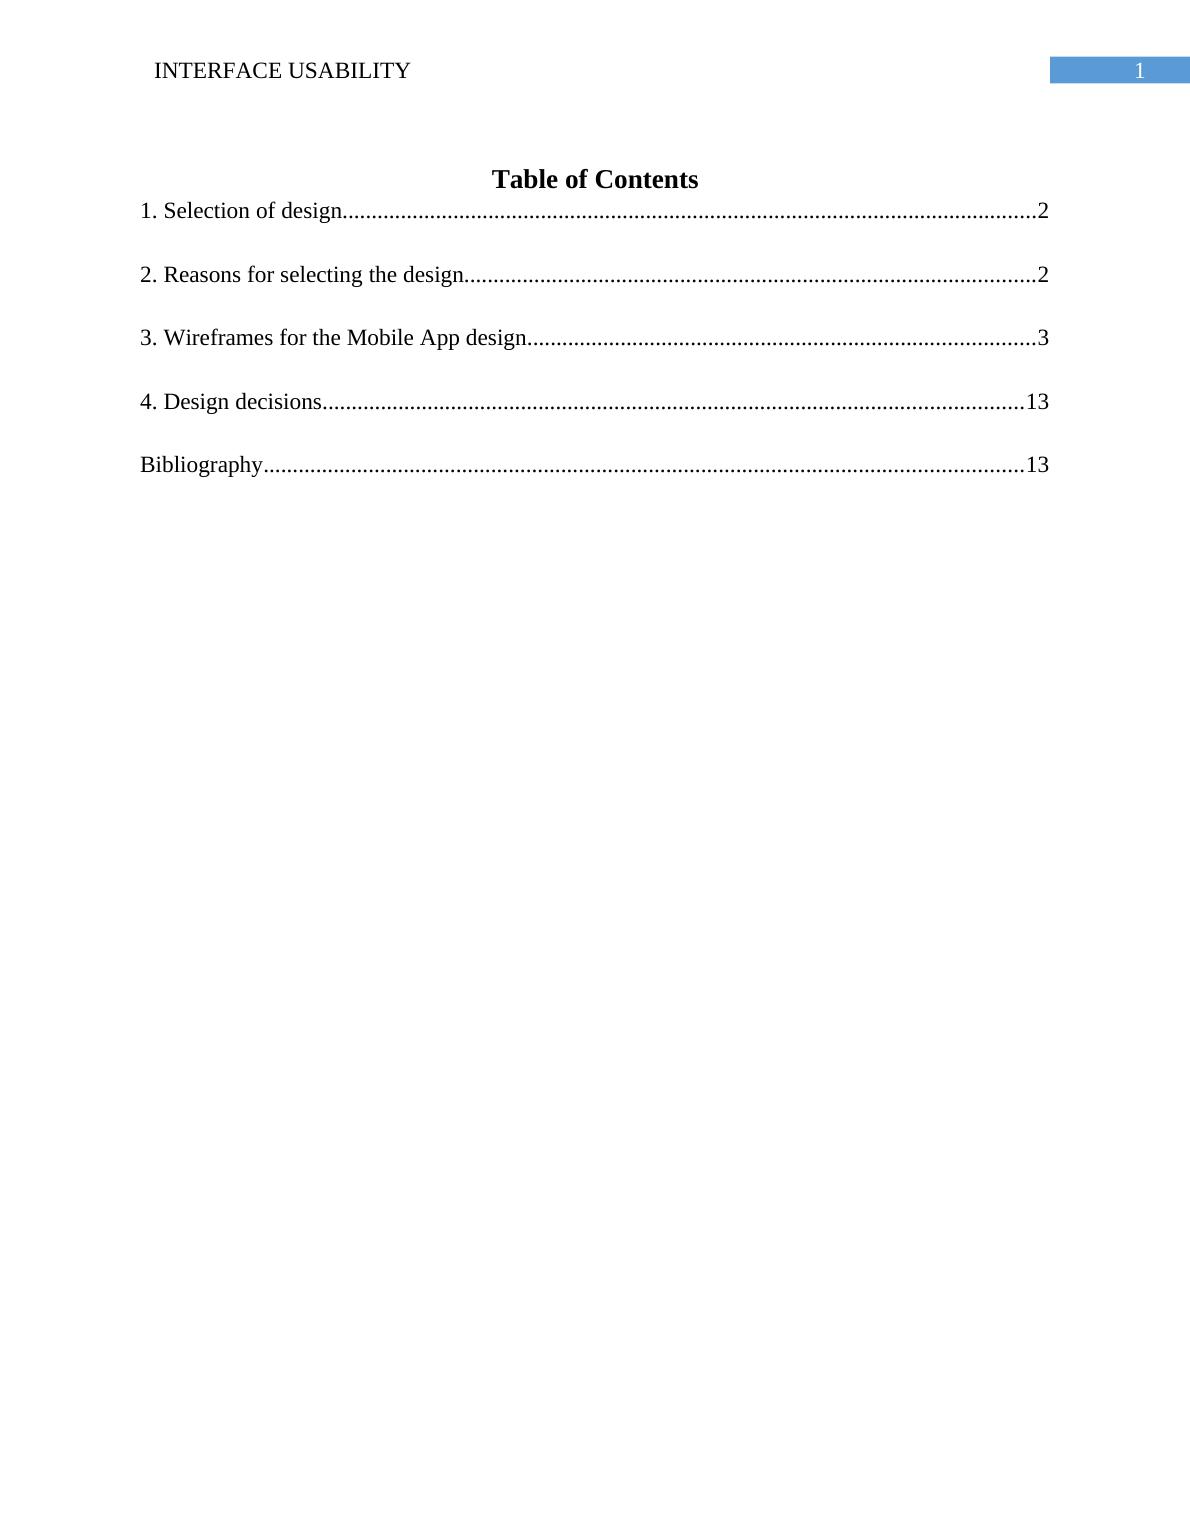 Interface Usability Assignment PDF_2